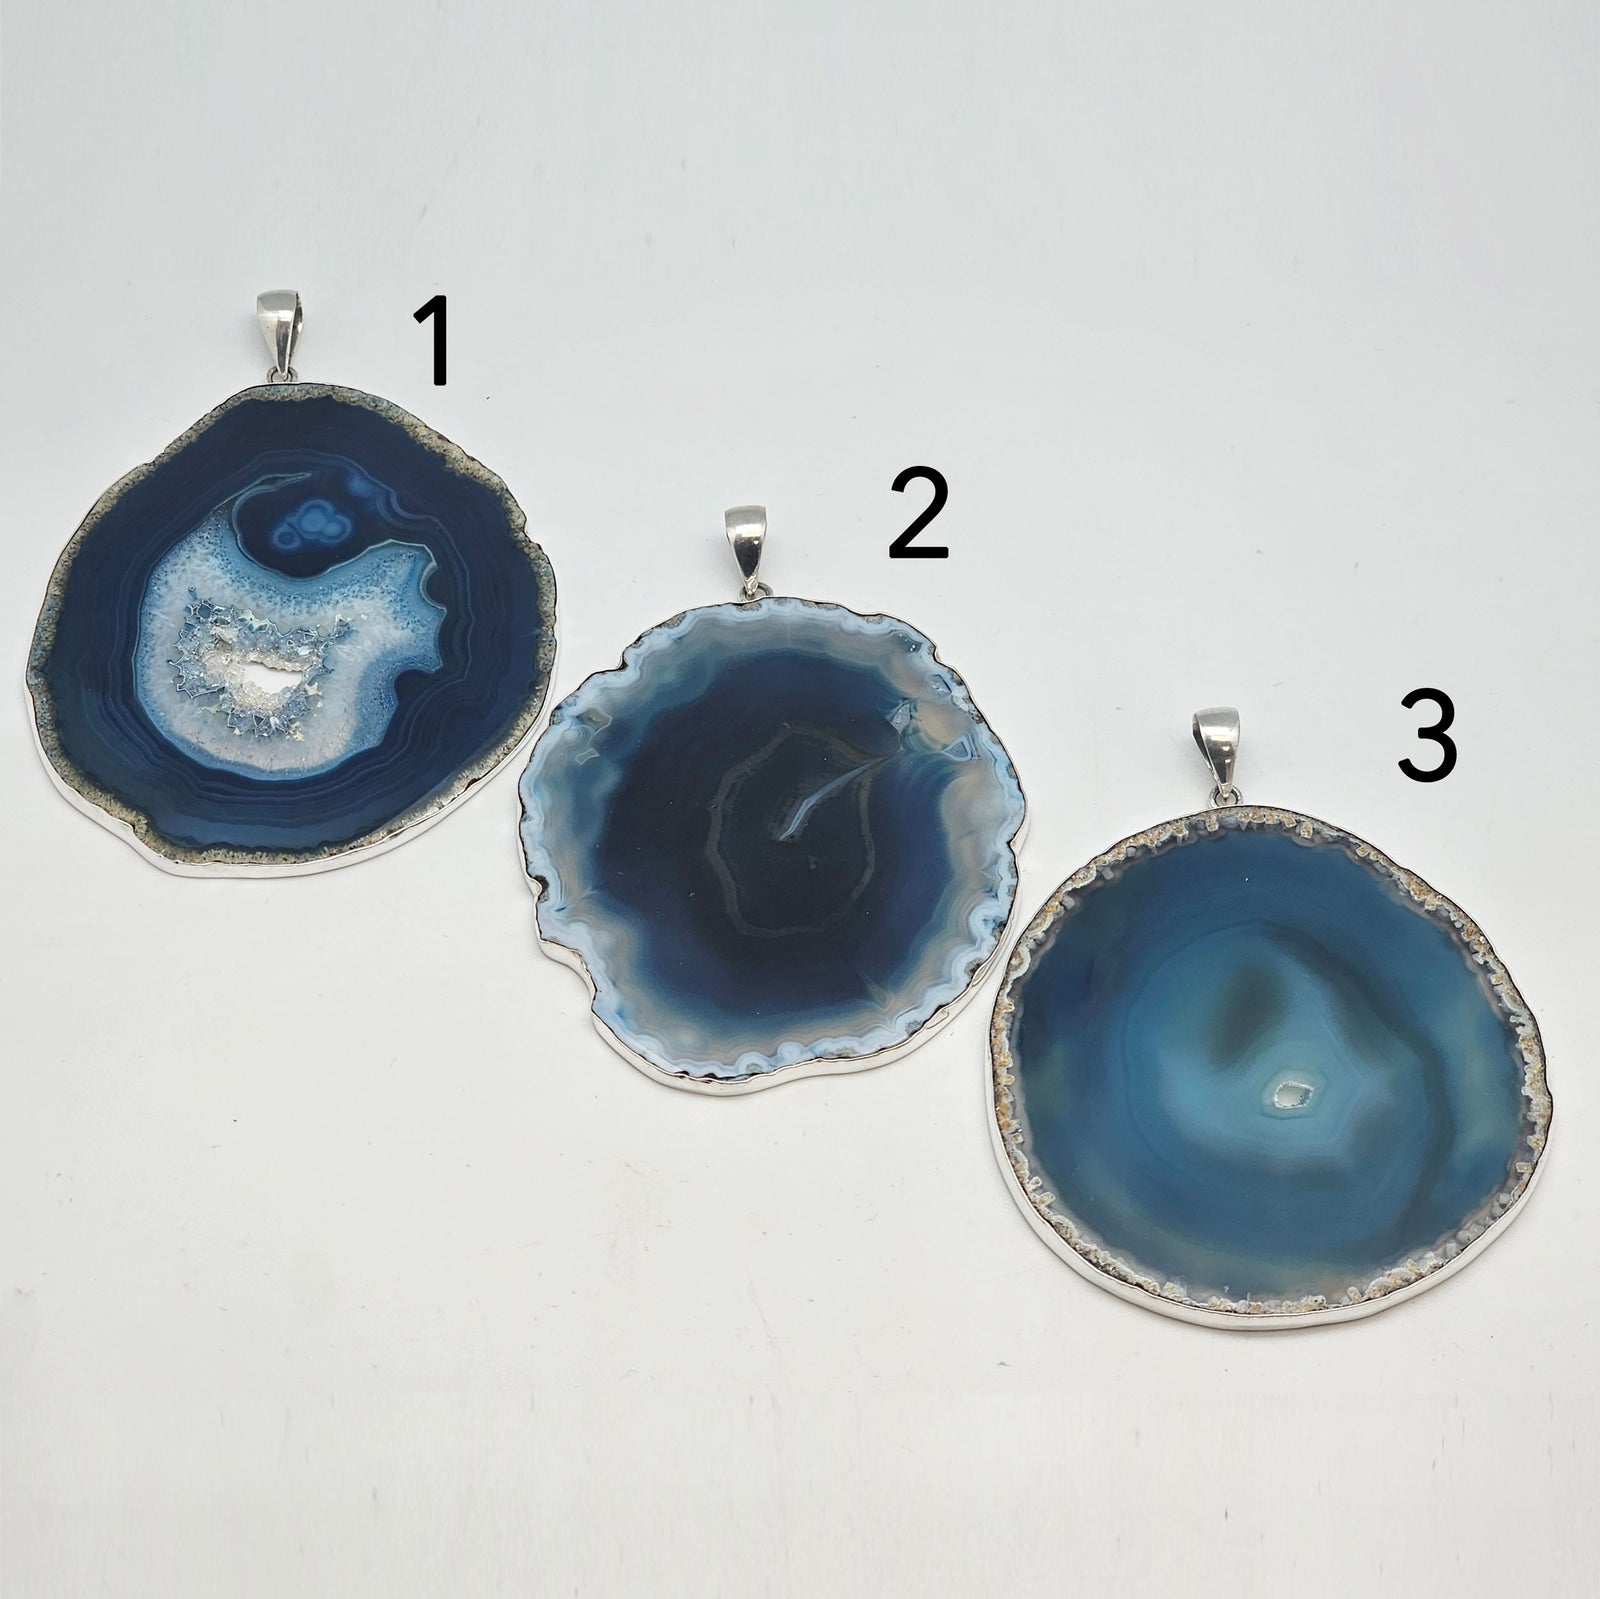 Sterling Silver Blue Agate Slice Pendant | Charles Albert Jewelry